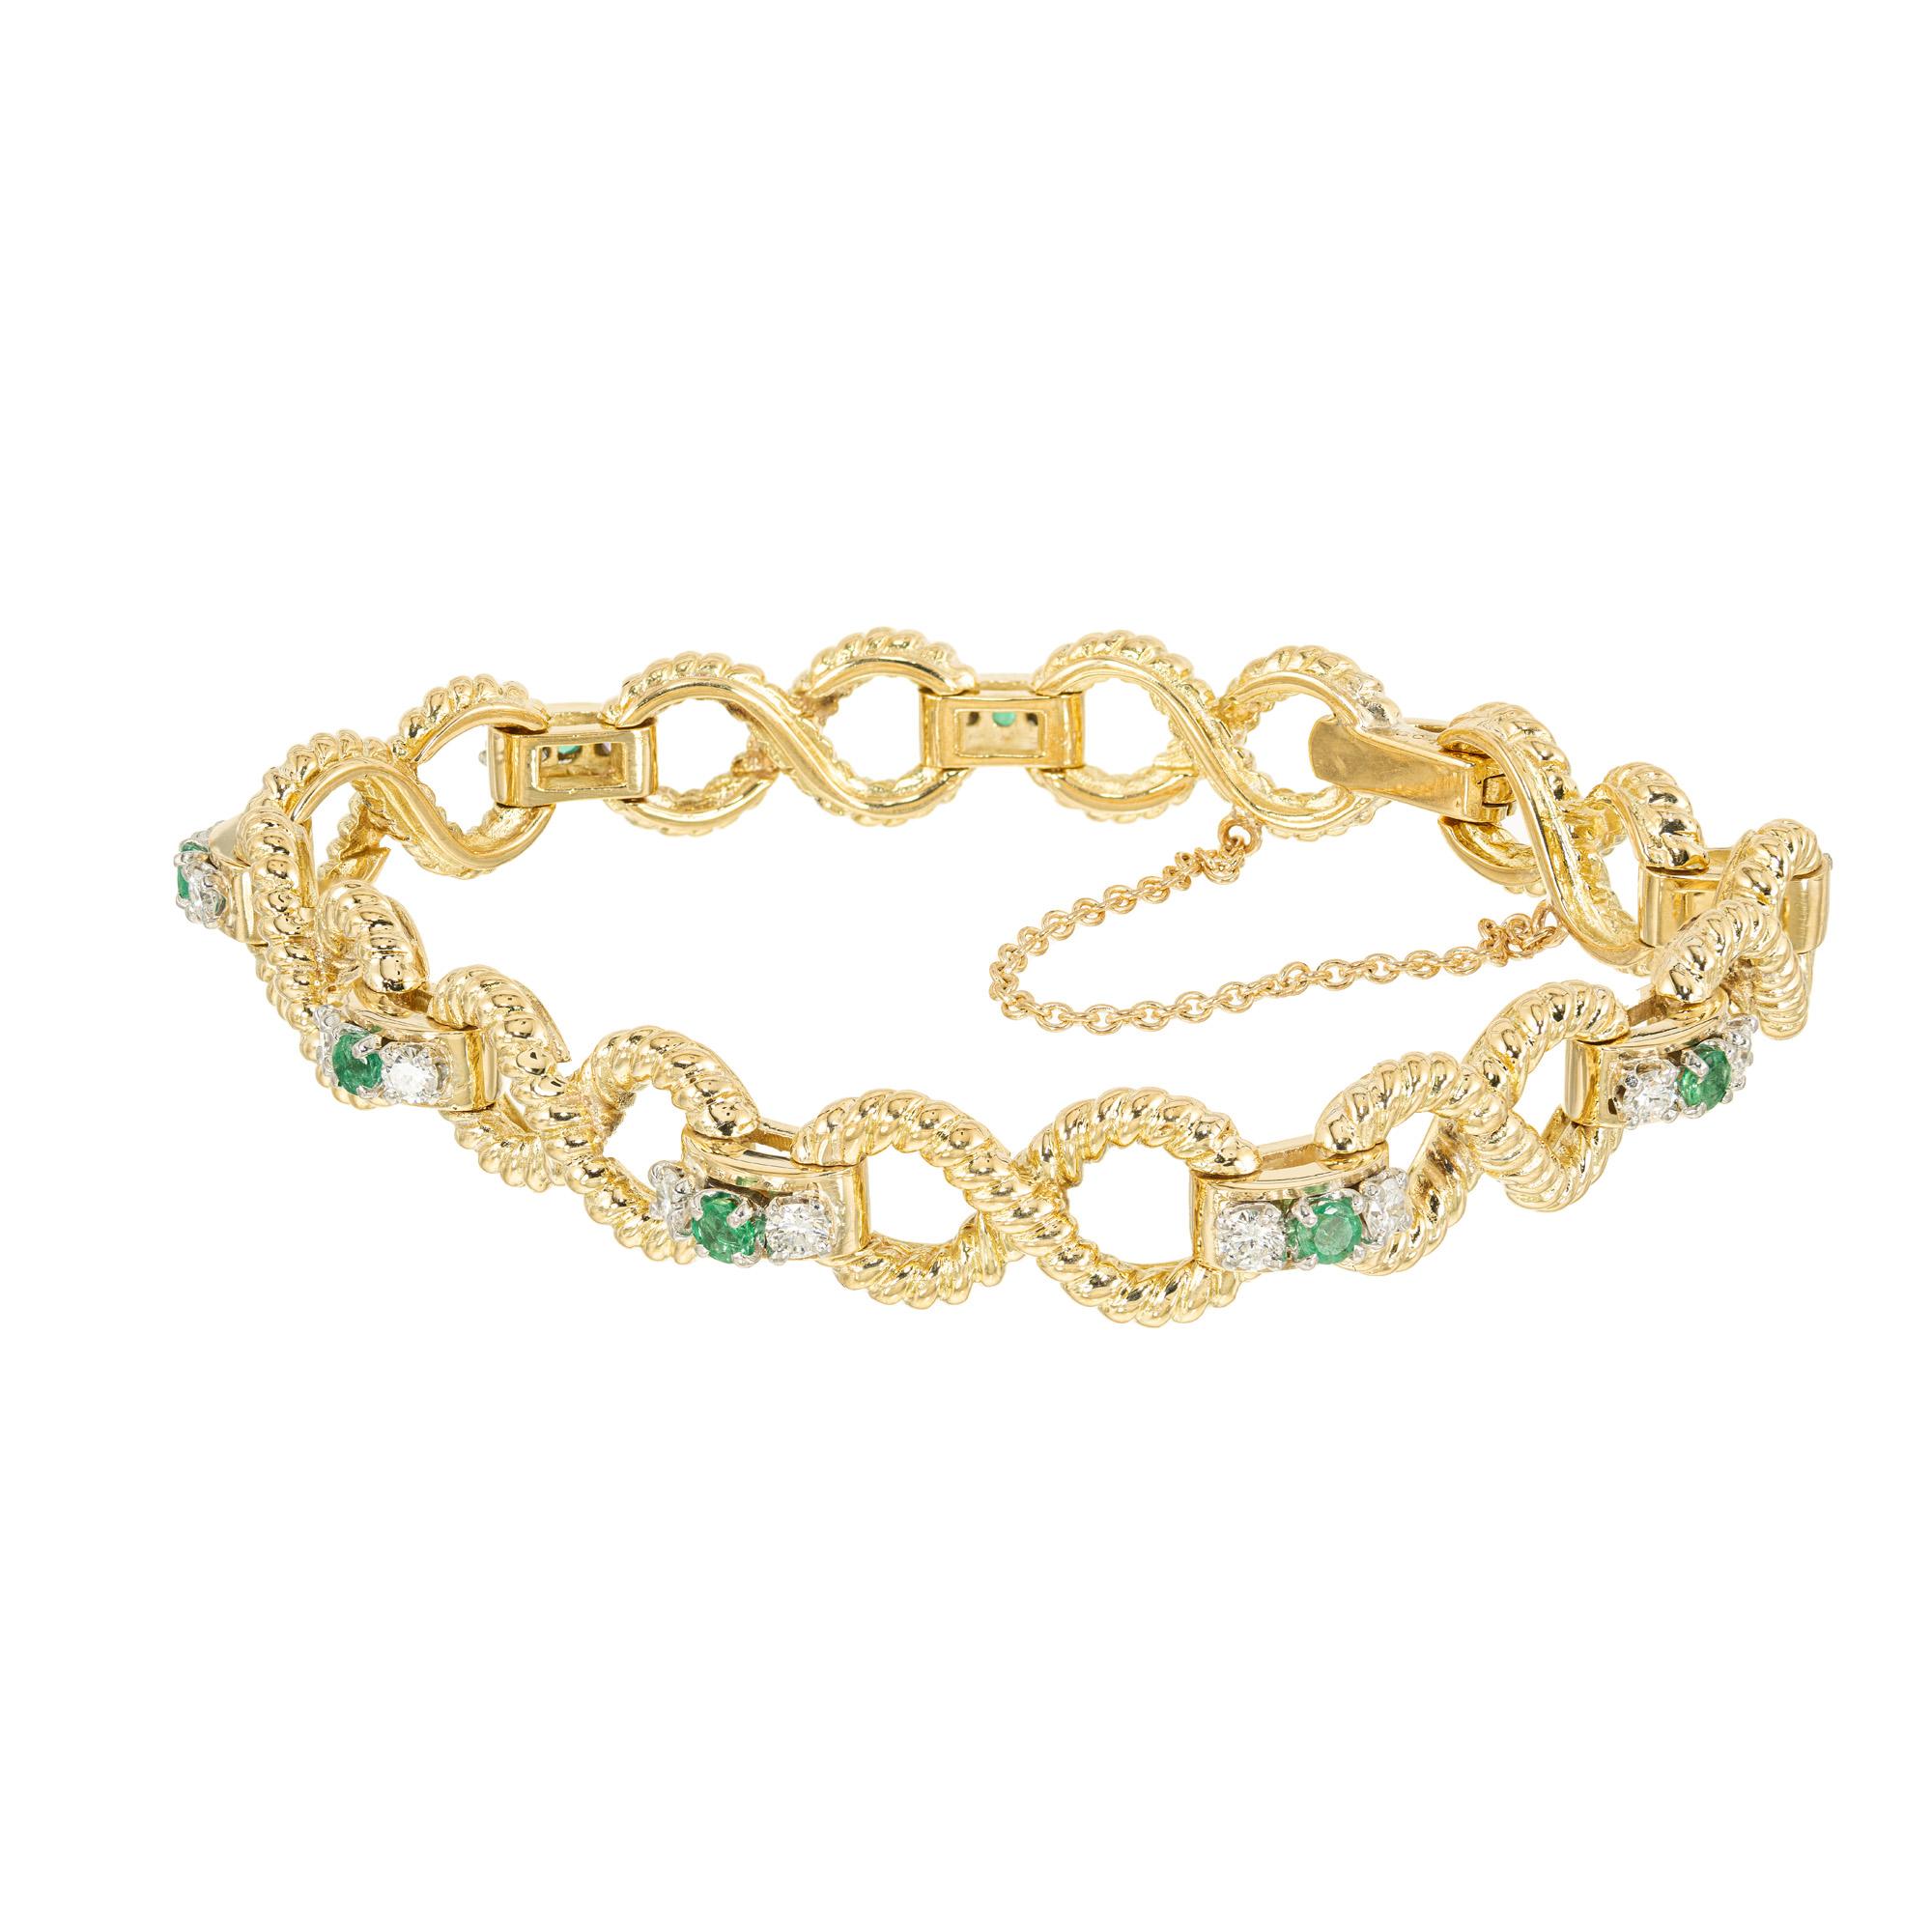 This stunning bracelet is designed to make a statement. This piece starts with sold 14k yellow gold figure eight, twisted wire links which are connected by 9 vibrant round emeralds that are surrounded by 18 round cut sparkling diamonds which